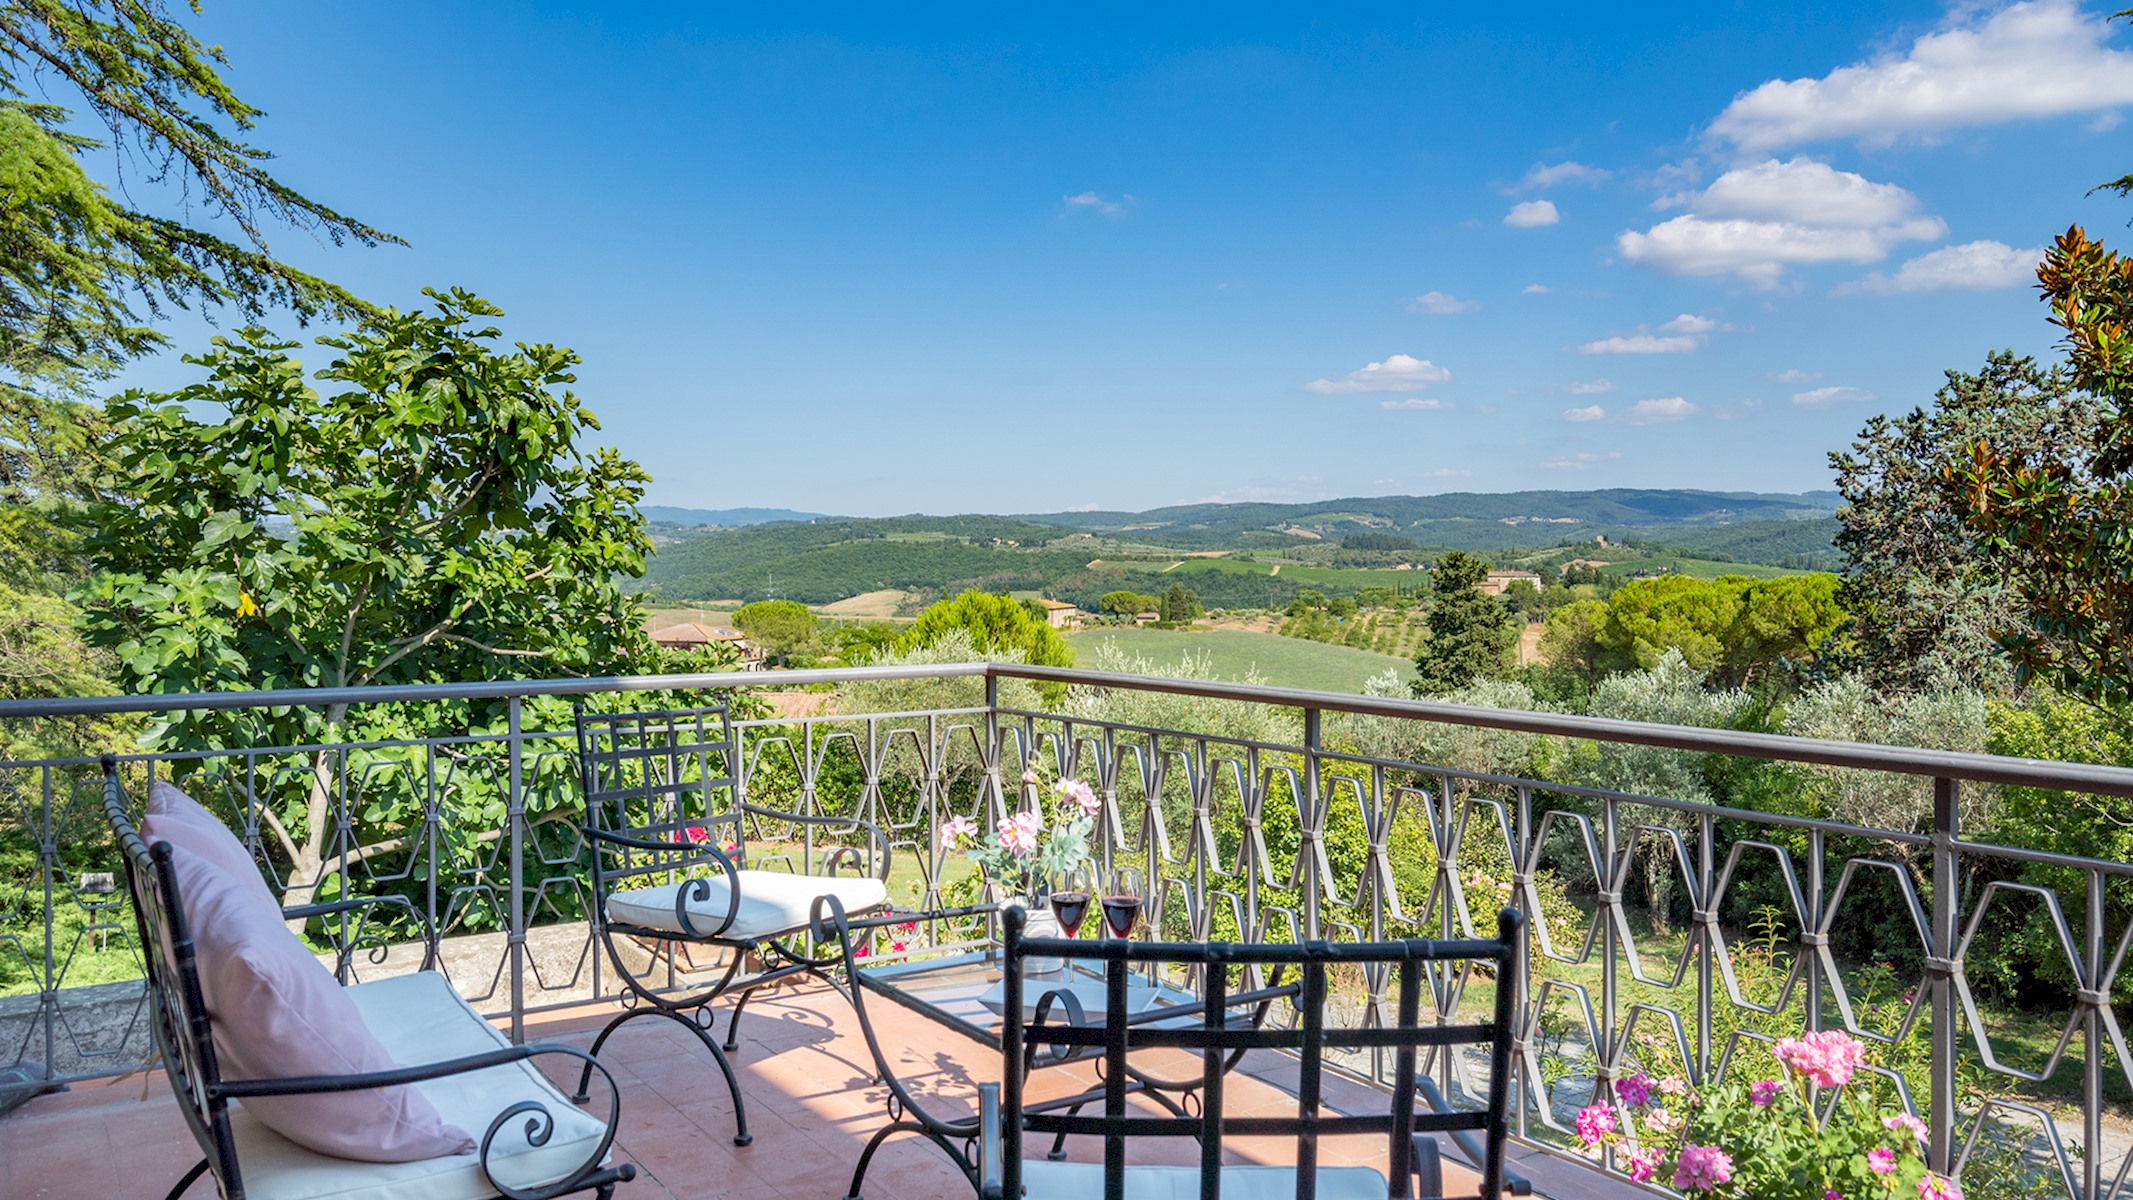 Take in the panoramic views of the rolling hills in the distance 